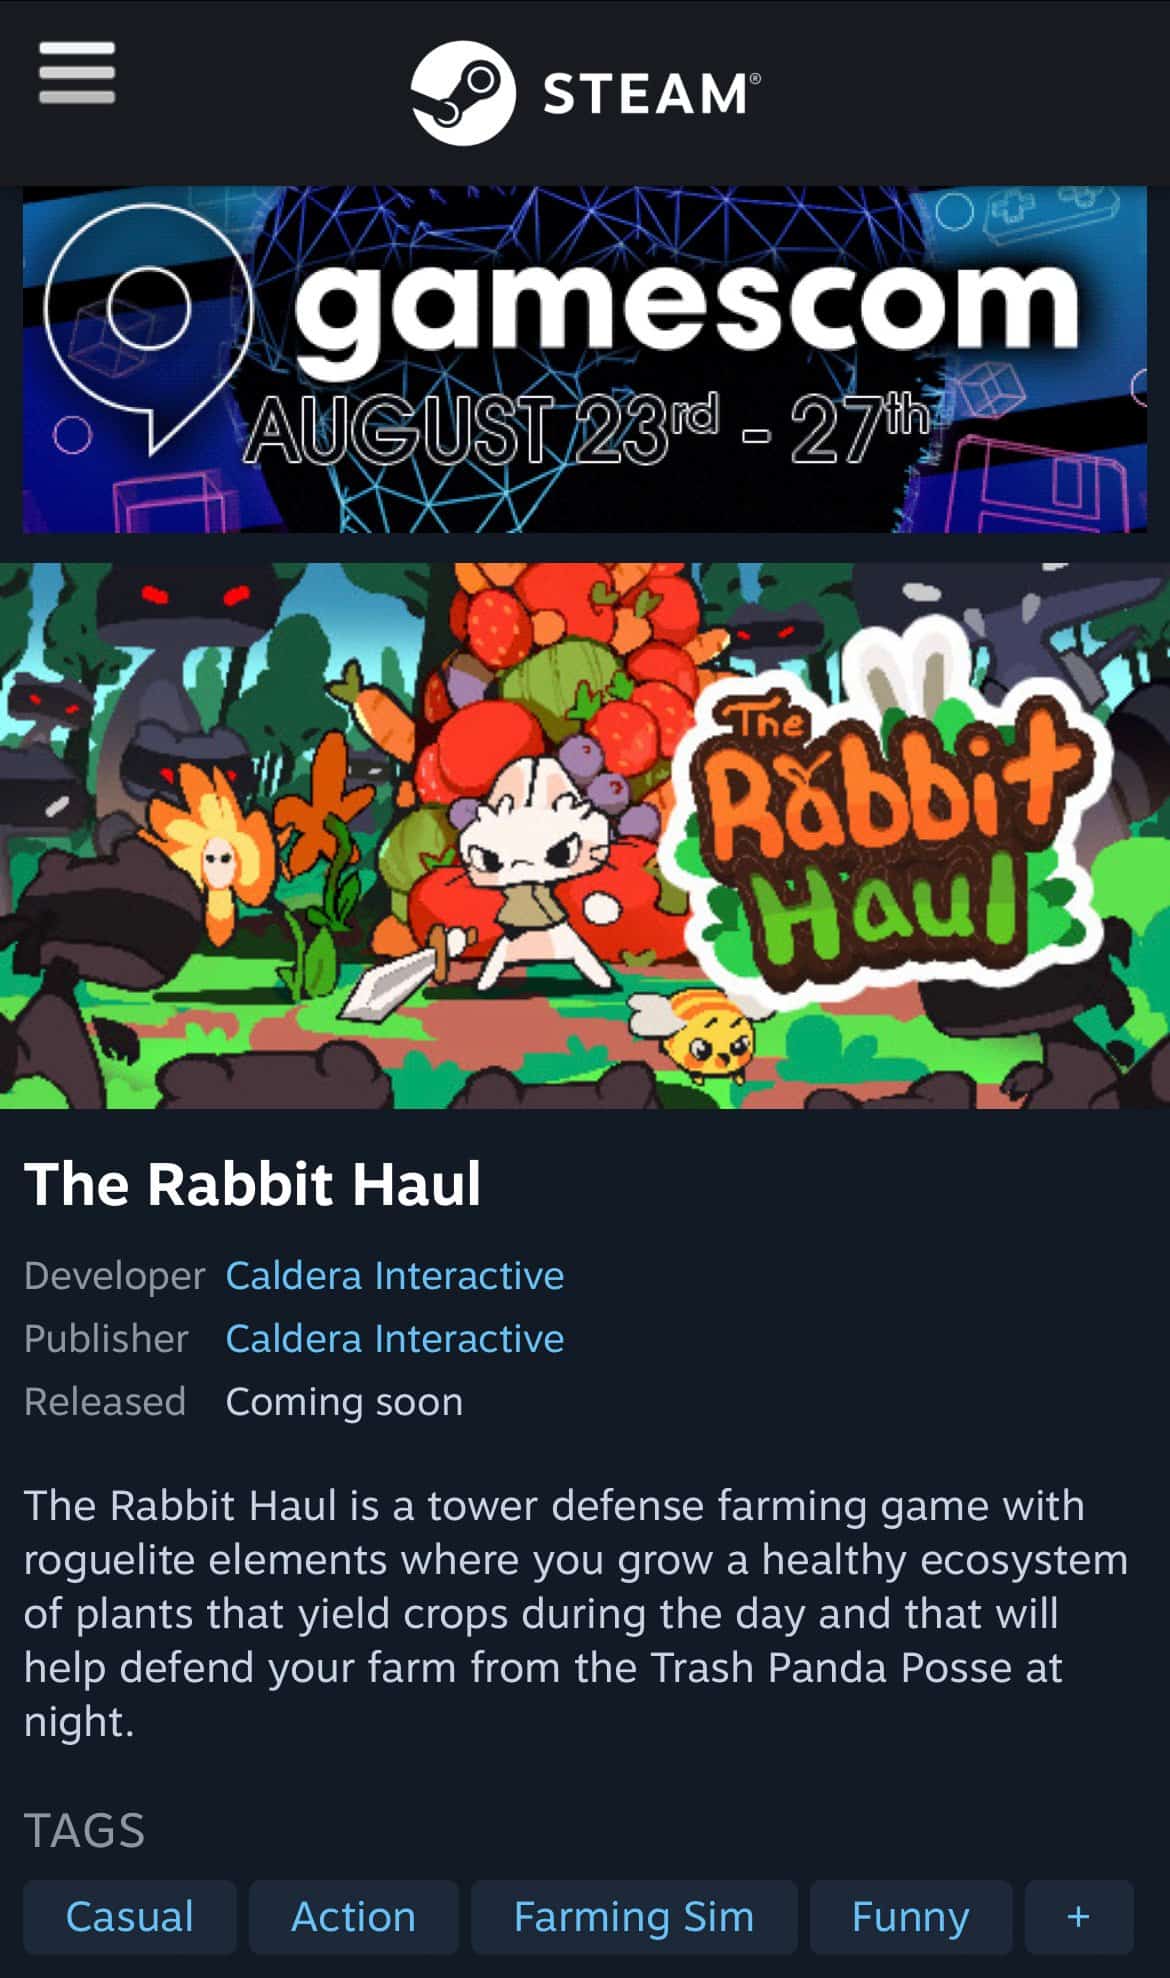 Screenshot of The Rabbit Haul's Steam page with the Gamescom Steam event banner